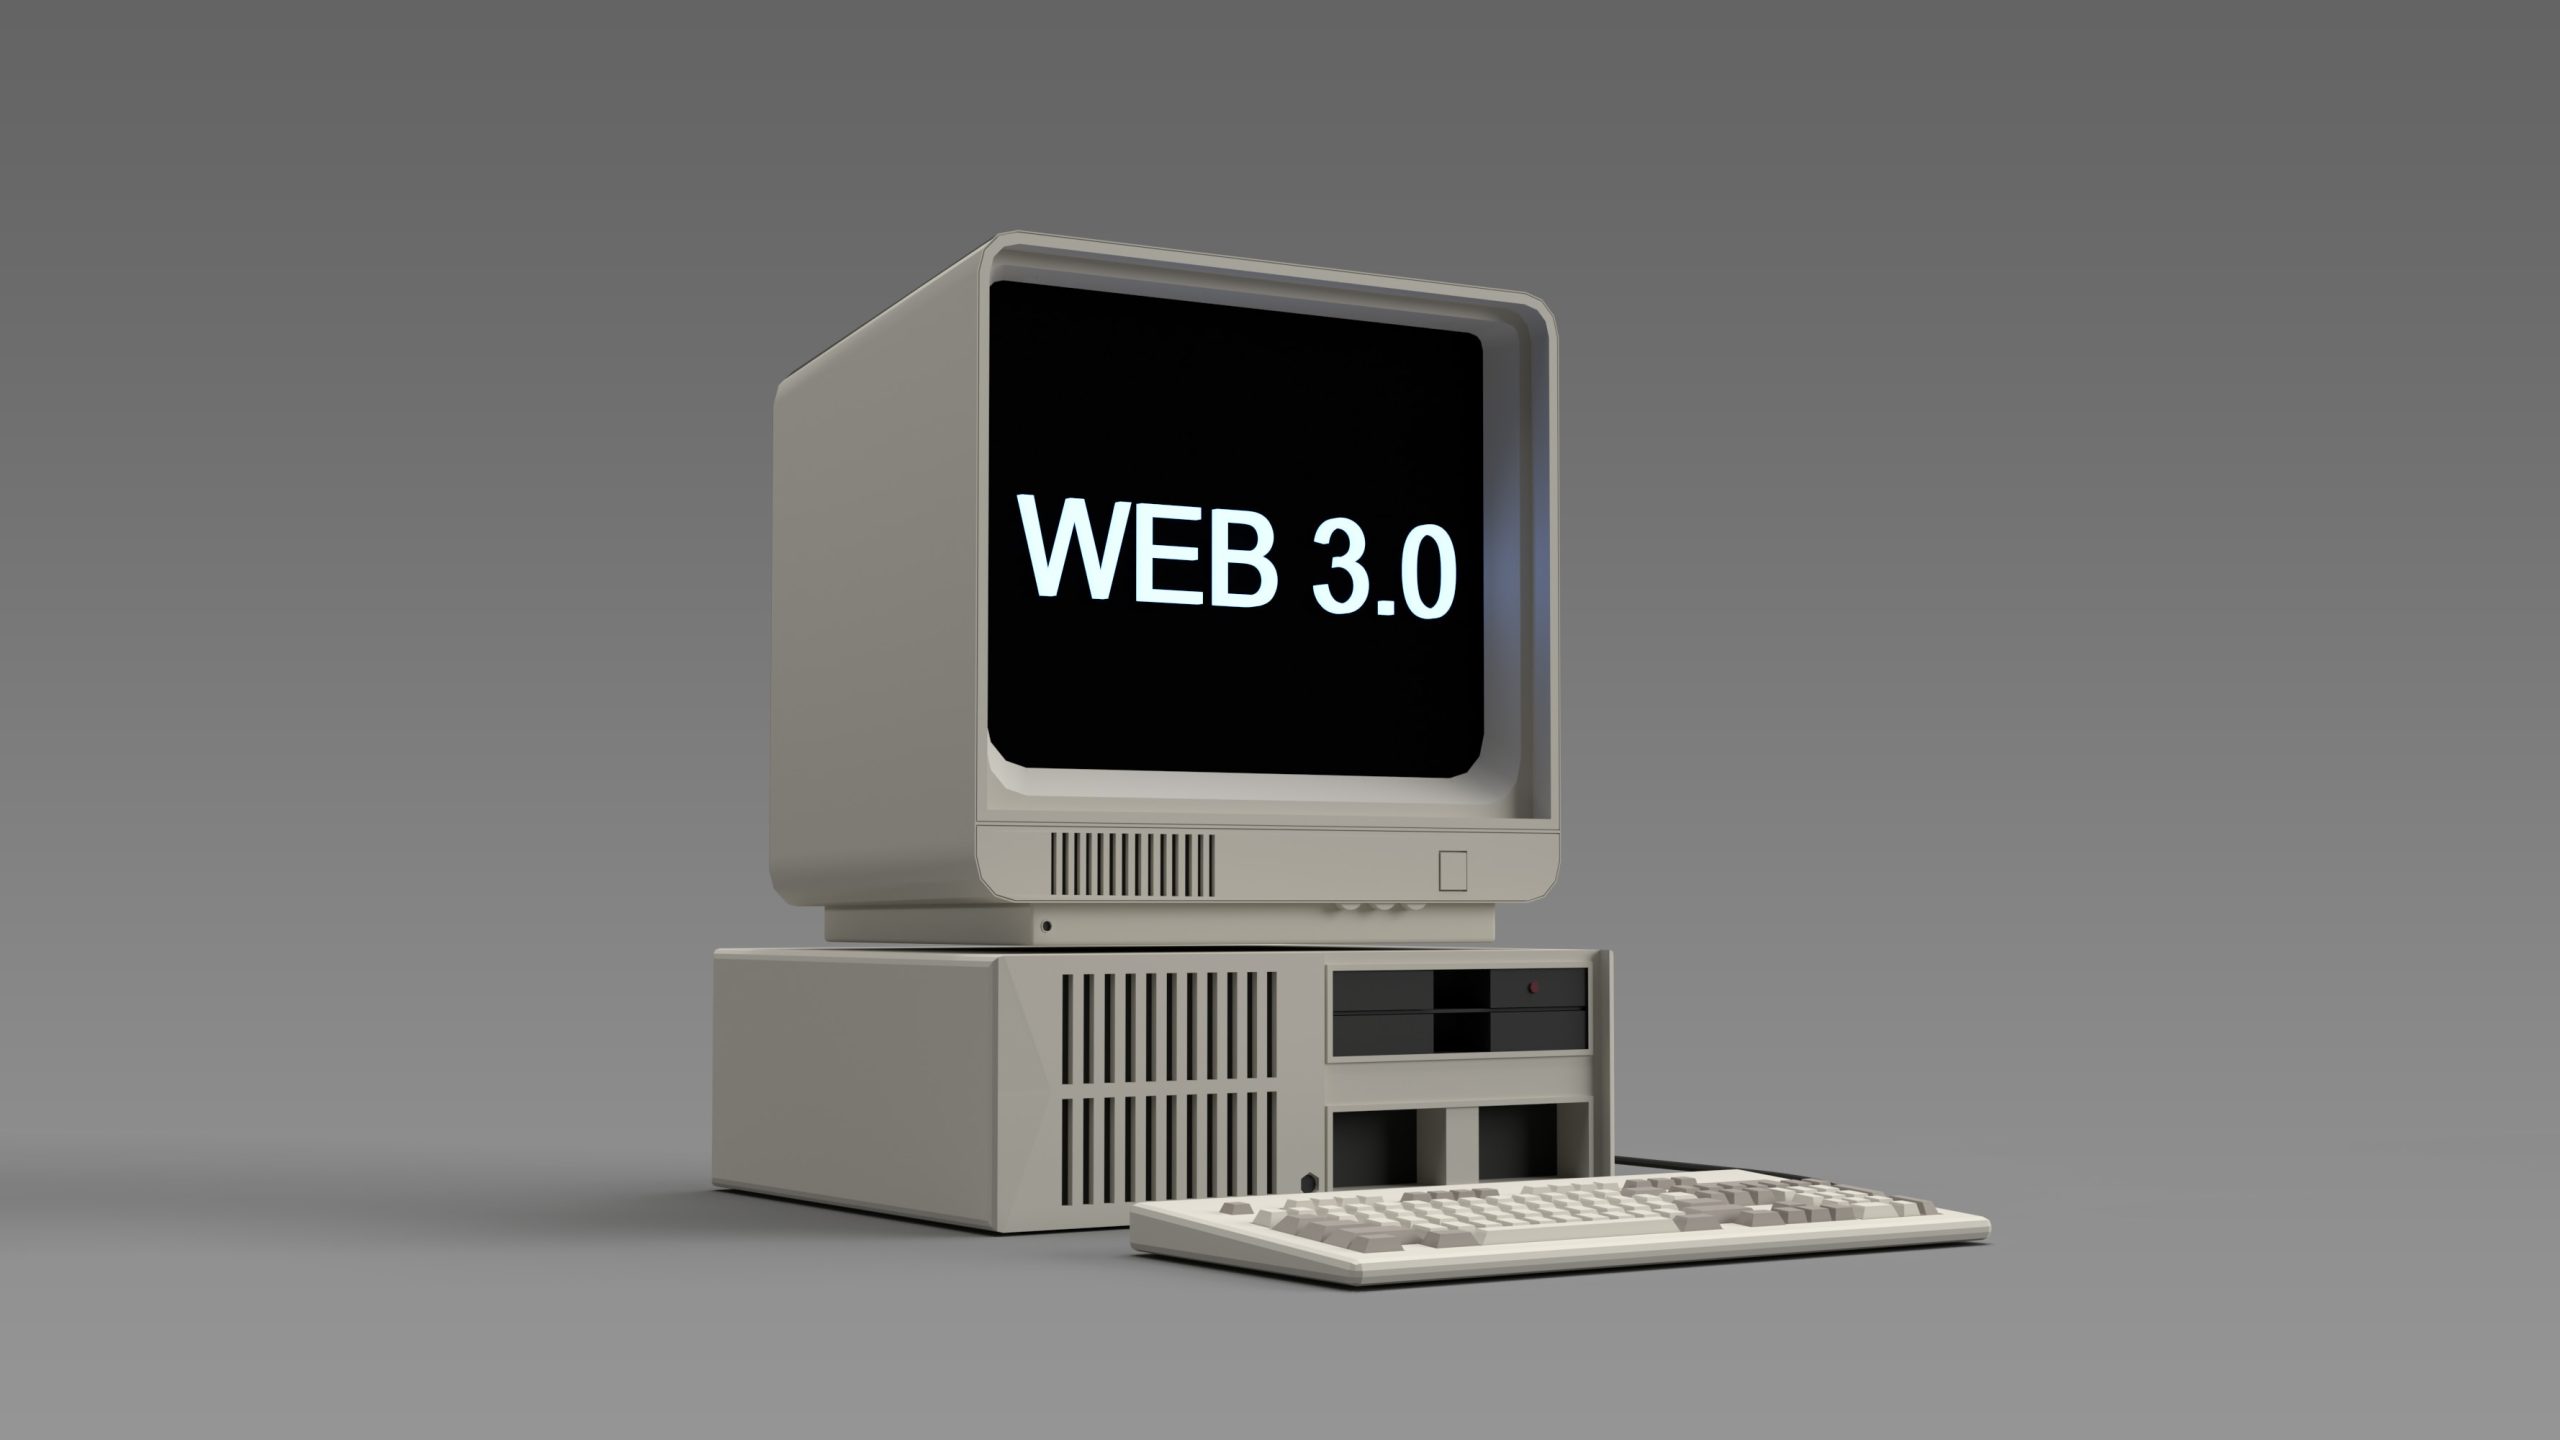 The Web 3.0: New Tech Evolution that Enhances the User Interface